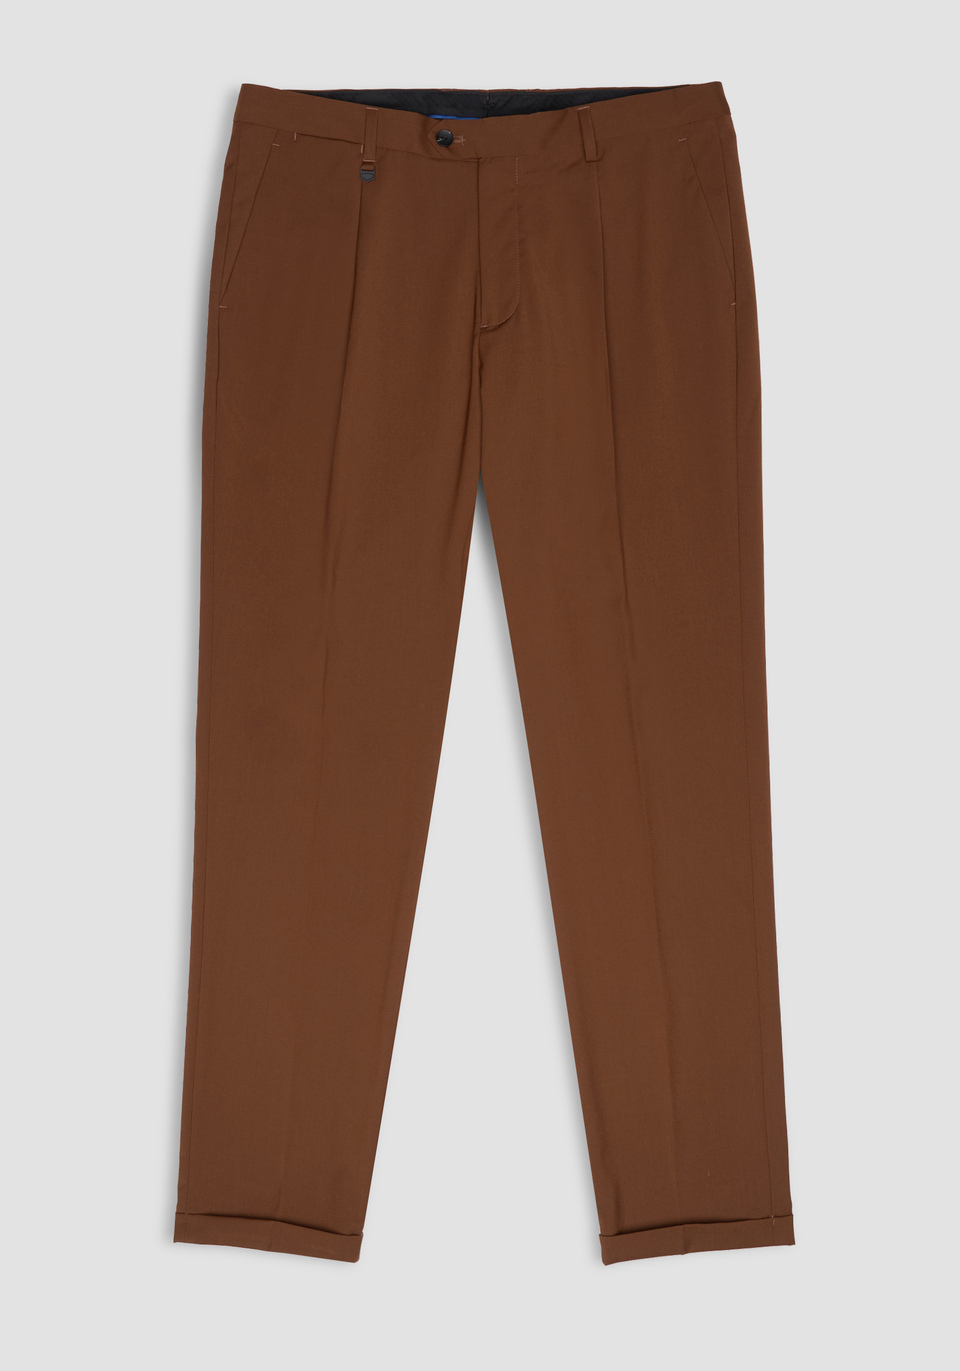 "RAMONES" SLIM FIT TROUSERS IN SOFT-TOUCH STRETCH FABRIC - Antony Morato Online Shop